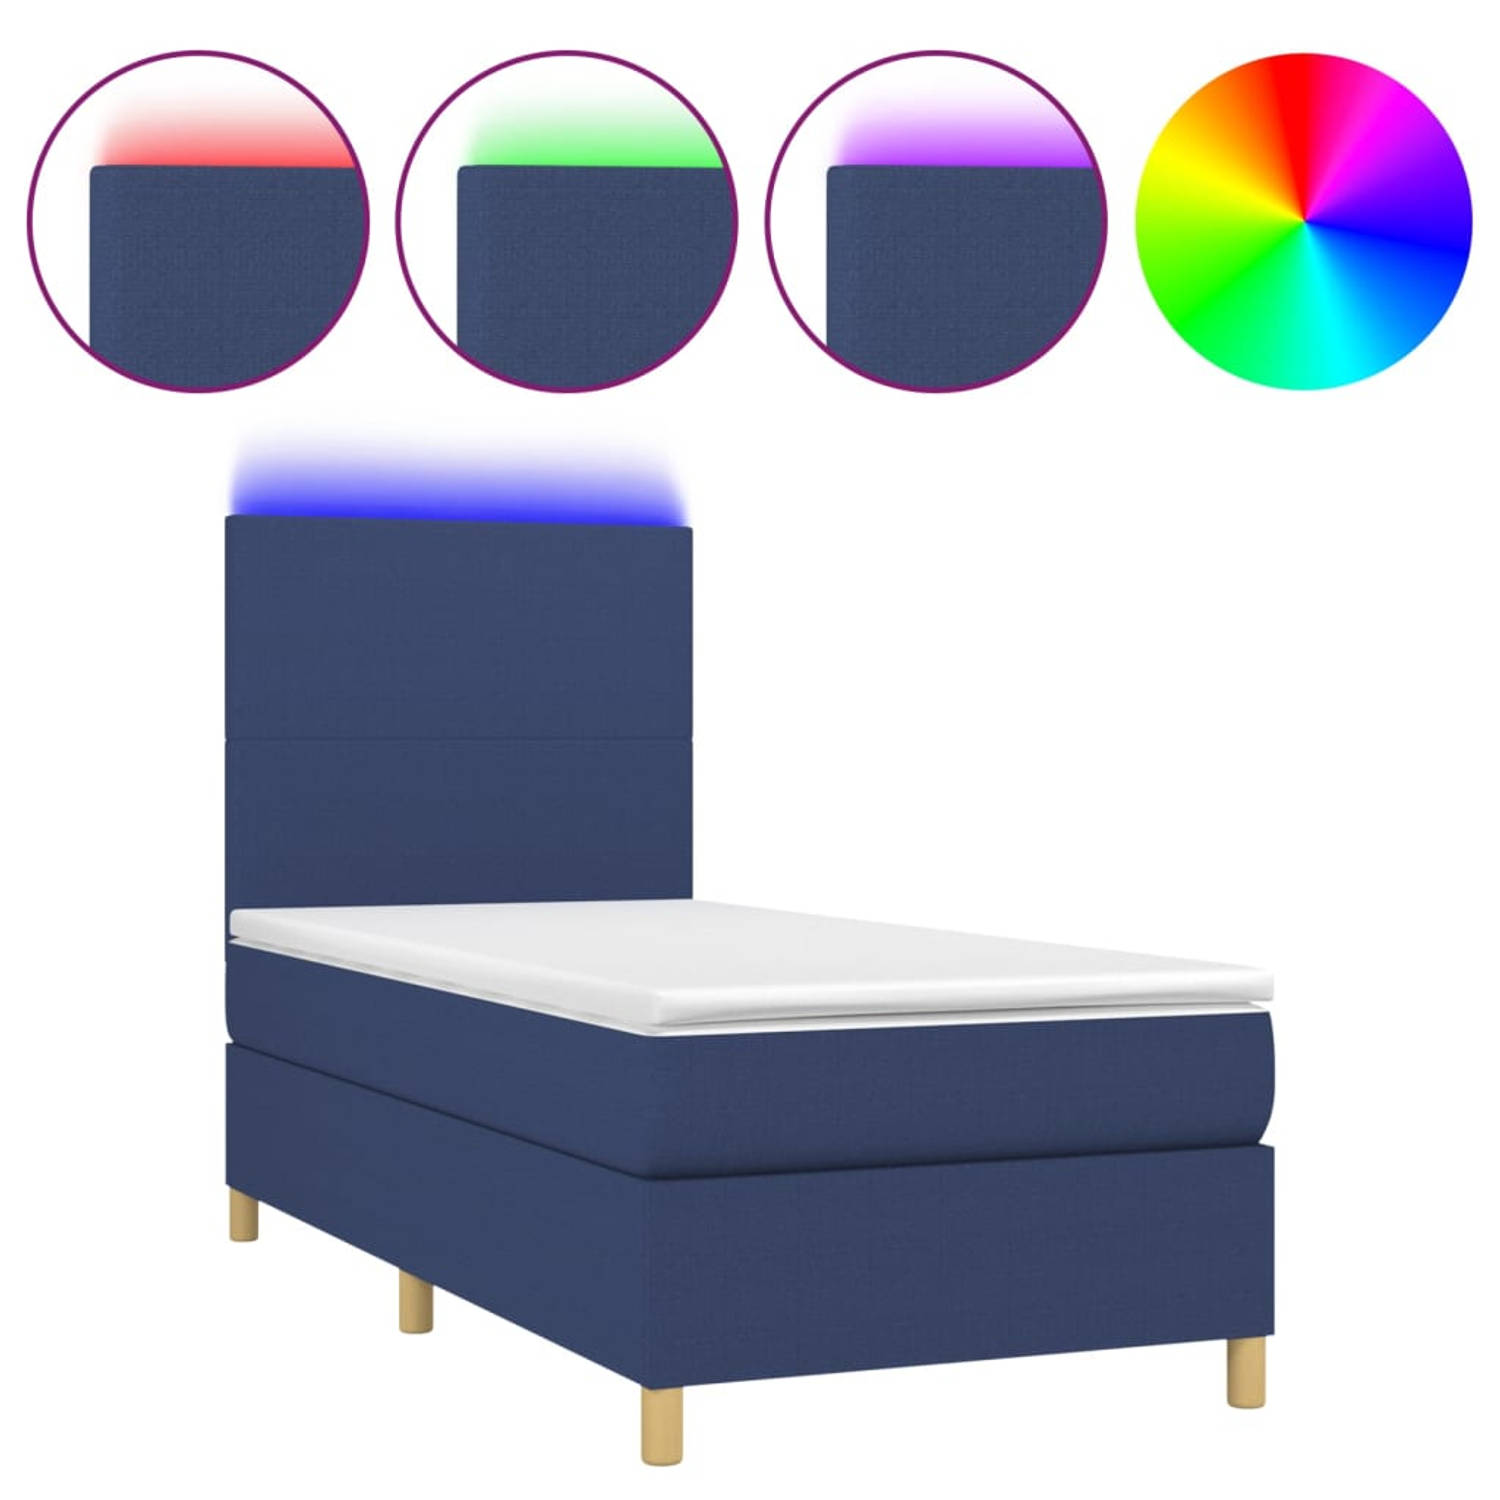 The Living Store Boxspring Bed - Blauw - 203 x 90 x 118/128 cm - LED-verlichting